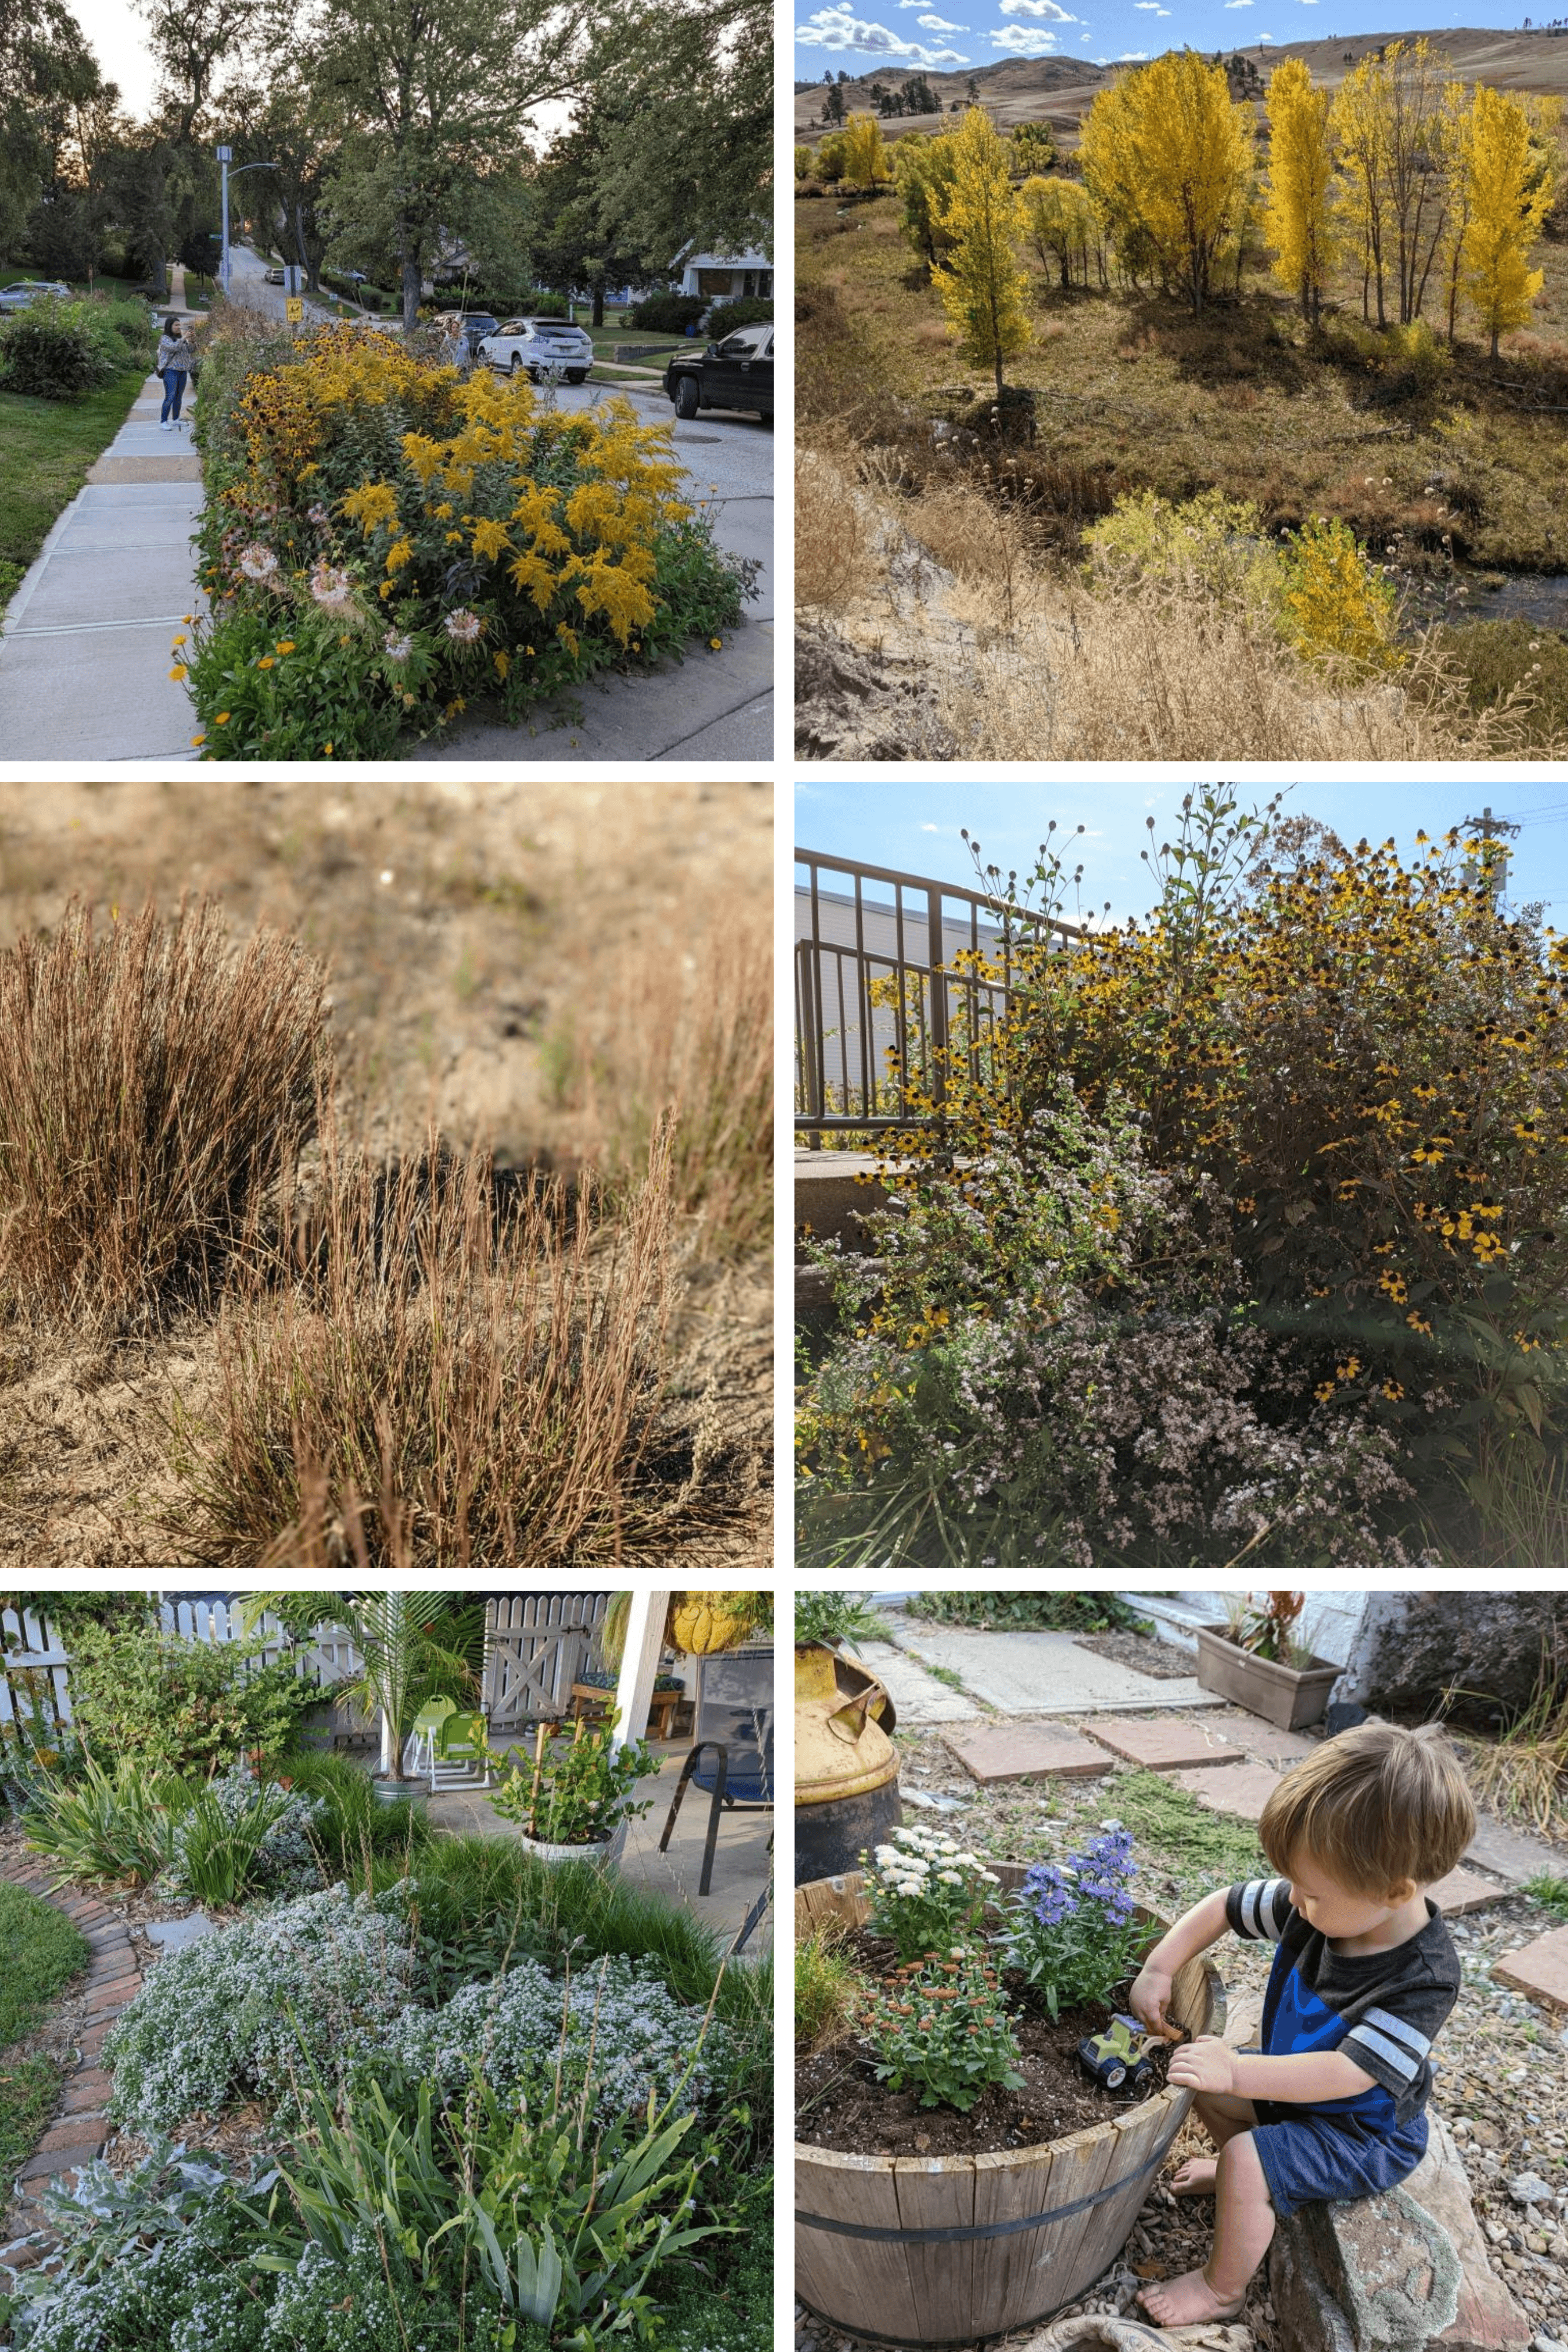 Yellow plants on the Omaha Garden Walk. Western NE fall color in the White River Valley. Little Bluestem starting to show fall color and texture. Asters and Black Eyed Susan blooming. Snow Flurry Aster. Sarah's son playing with a bulldozer toy in plants.